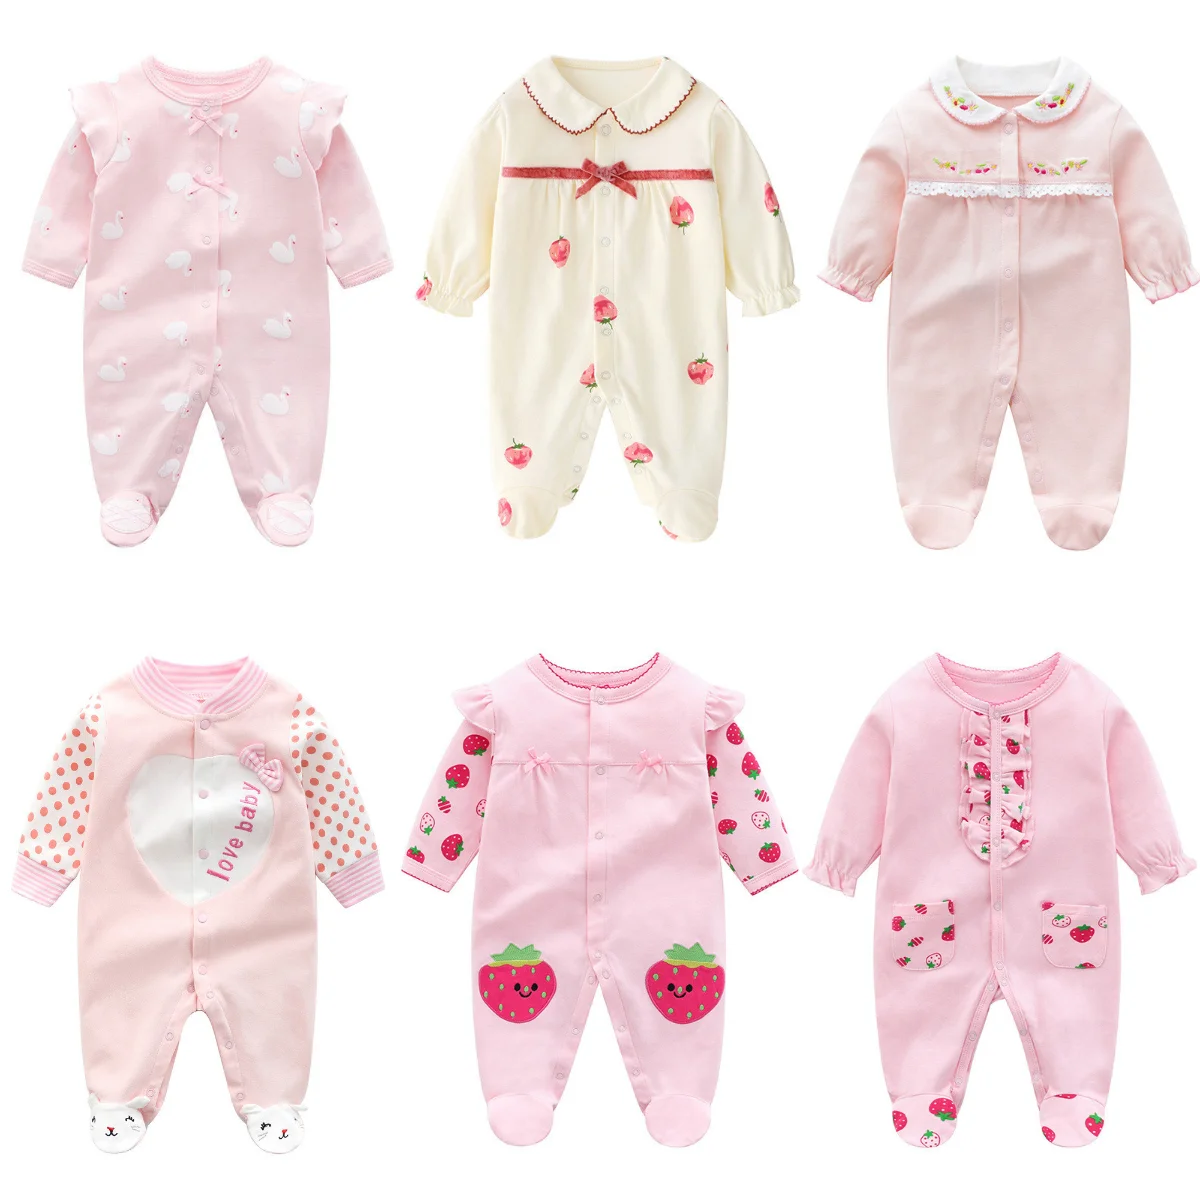 

Cotton Baby Girl Bodysuit Long Sleeve Baby Romper Baby Girl Clothes New Born Baby Items 0-18M